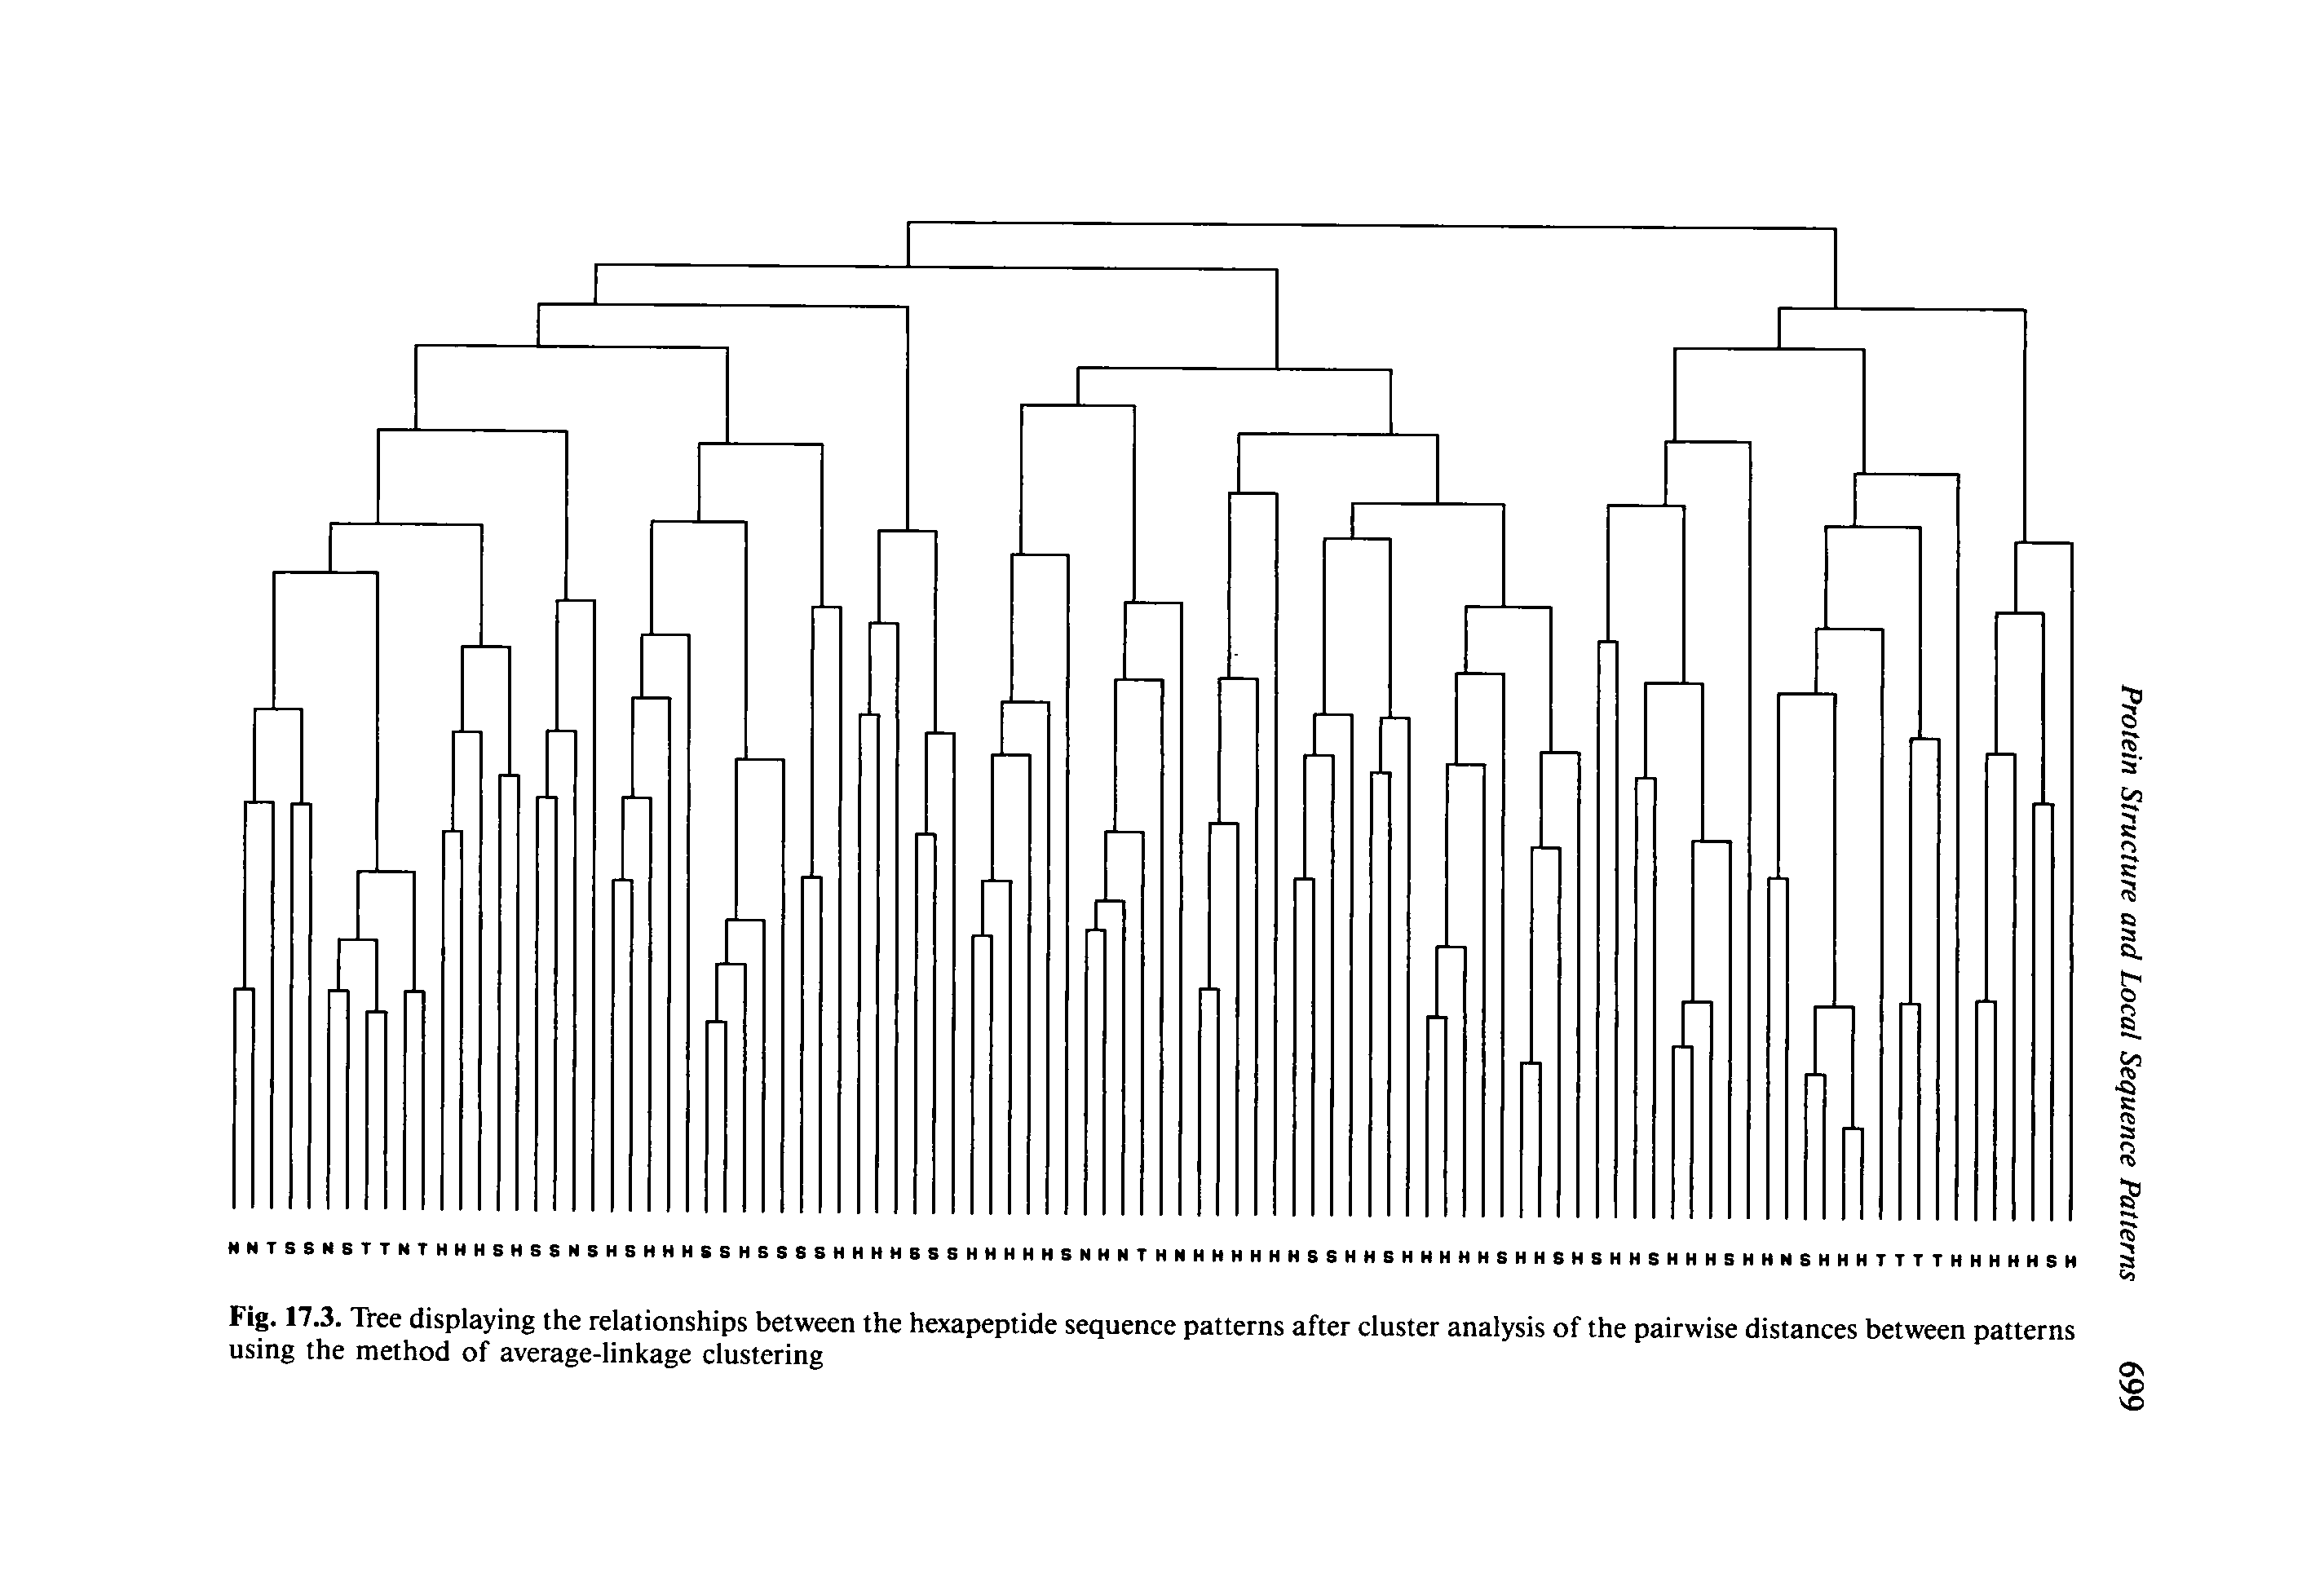 Fig. 17.3. Tree displaying the relationships between the hexapeptide sequence patterns after cluster analysis of the pairwise distances between patterns using the method of average-linkage clustering...